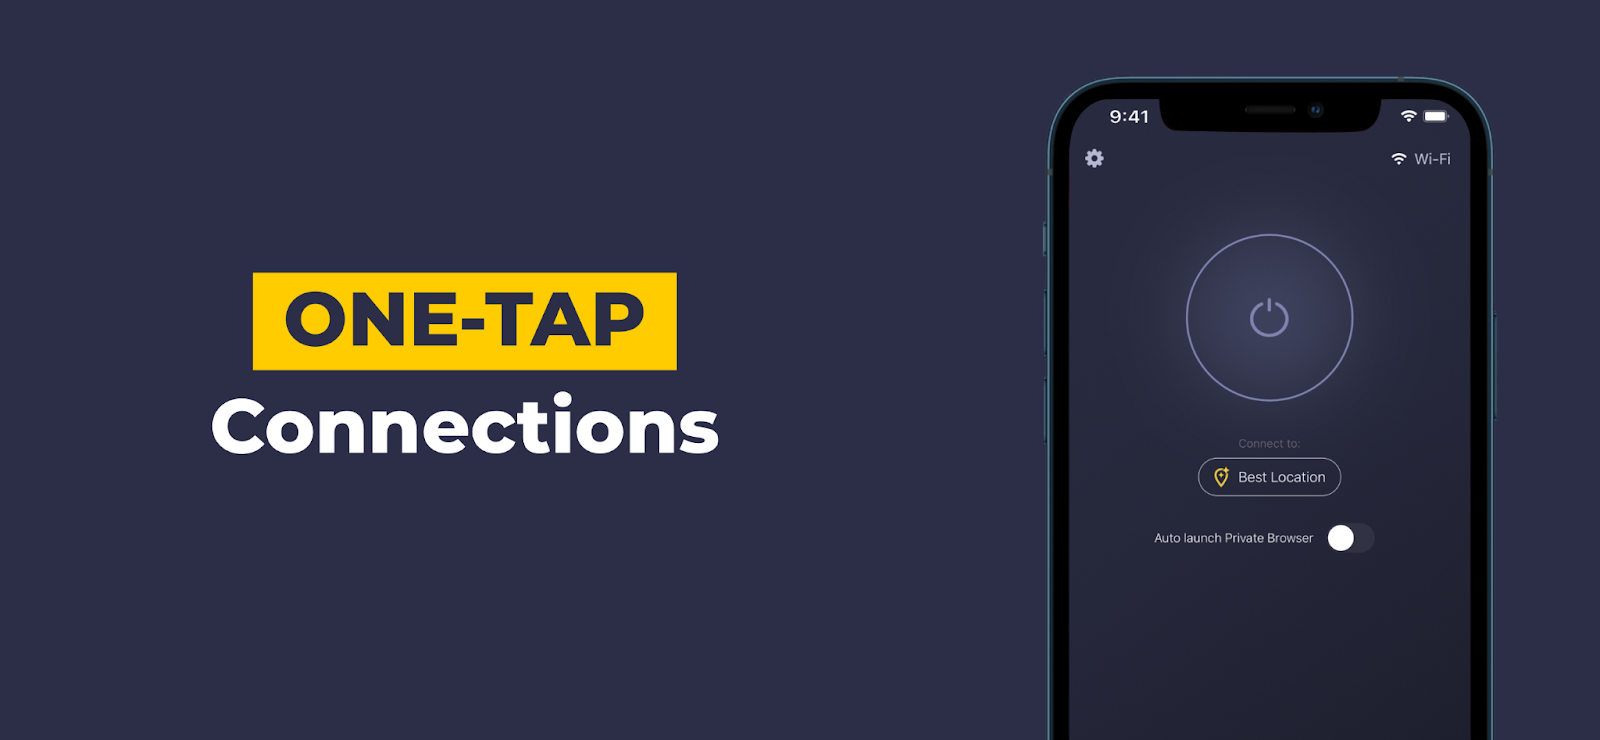 CyberGhost VPN 8 offers one-tap connections